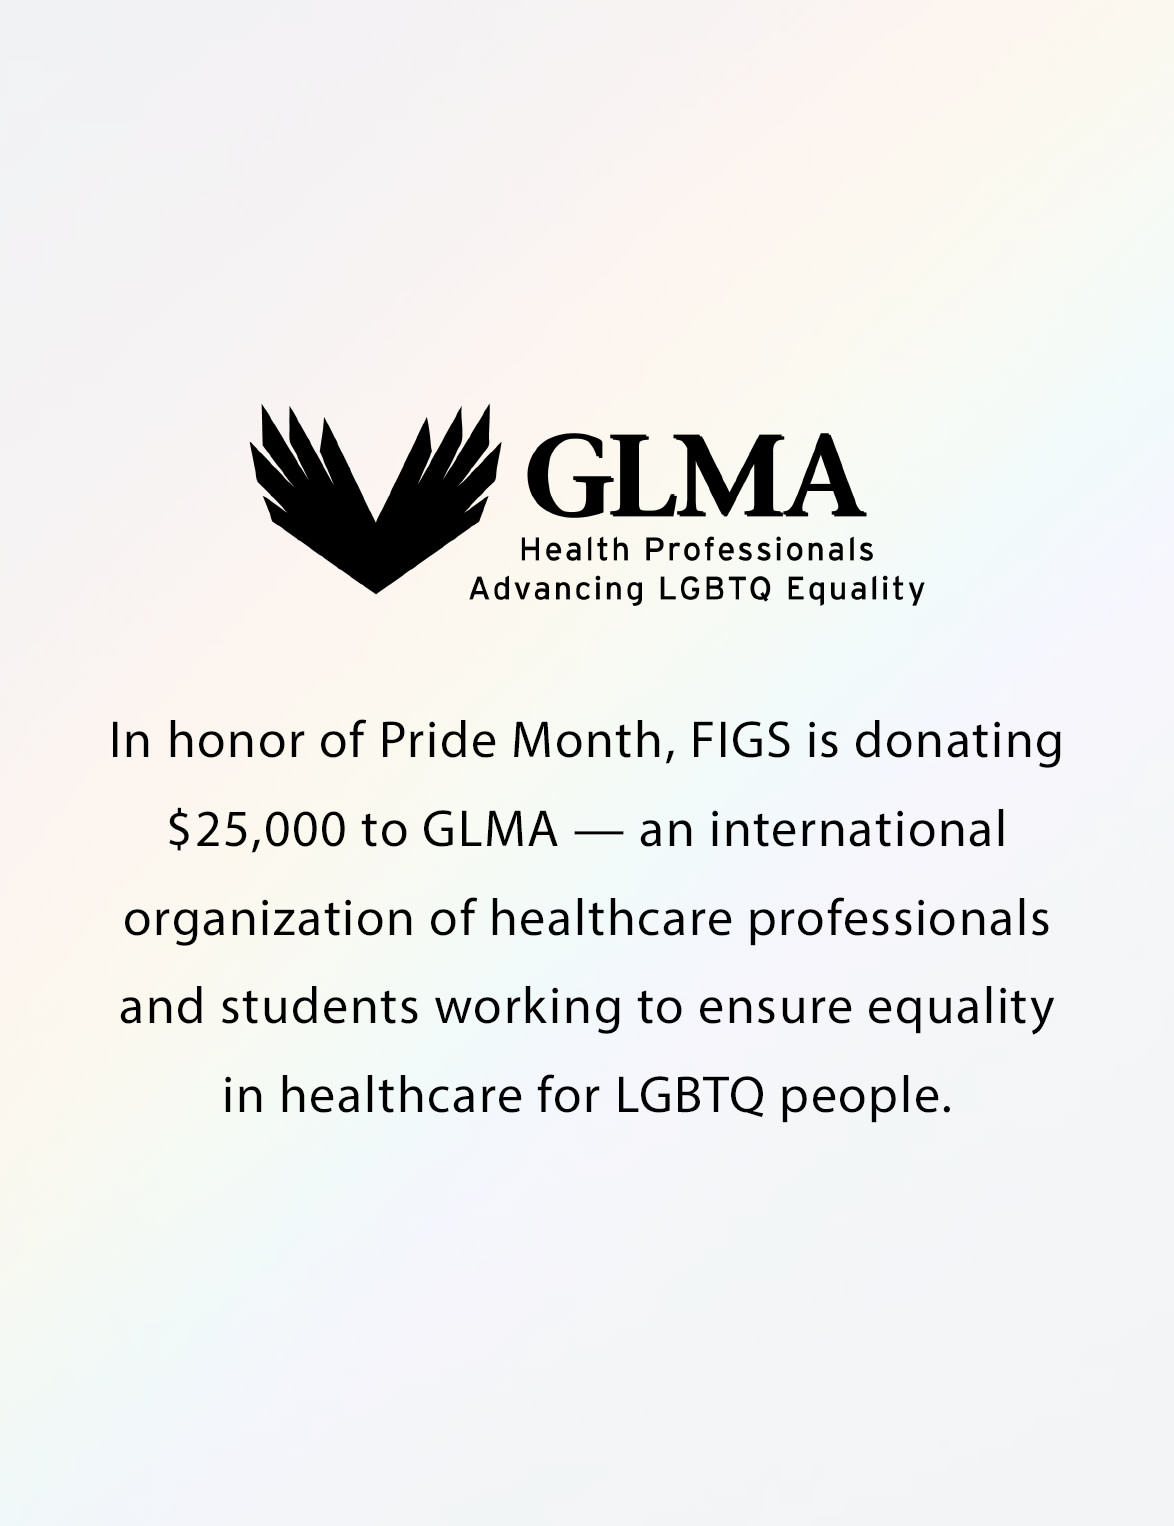 Happy Pride! This year, we're supporting LGBTQIA+ equality in healthcare with a $25,000 donation to GLMA.